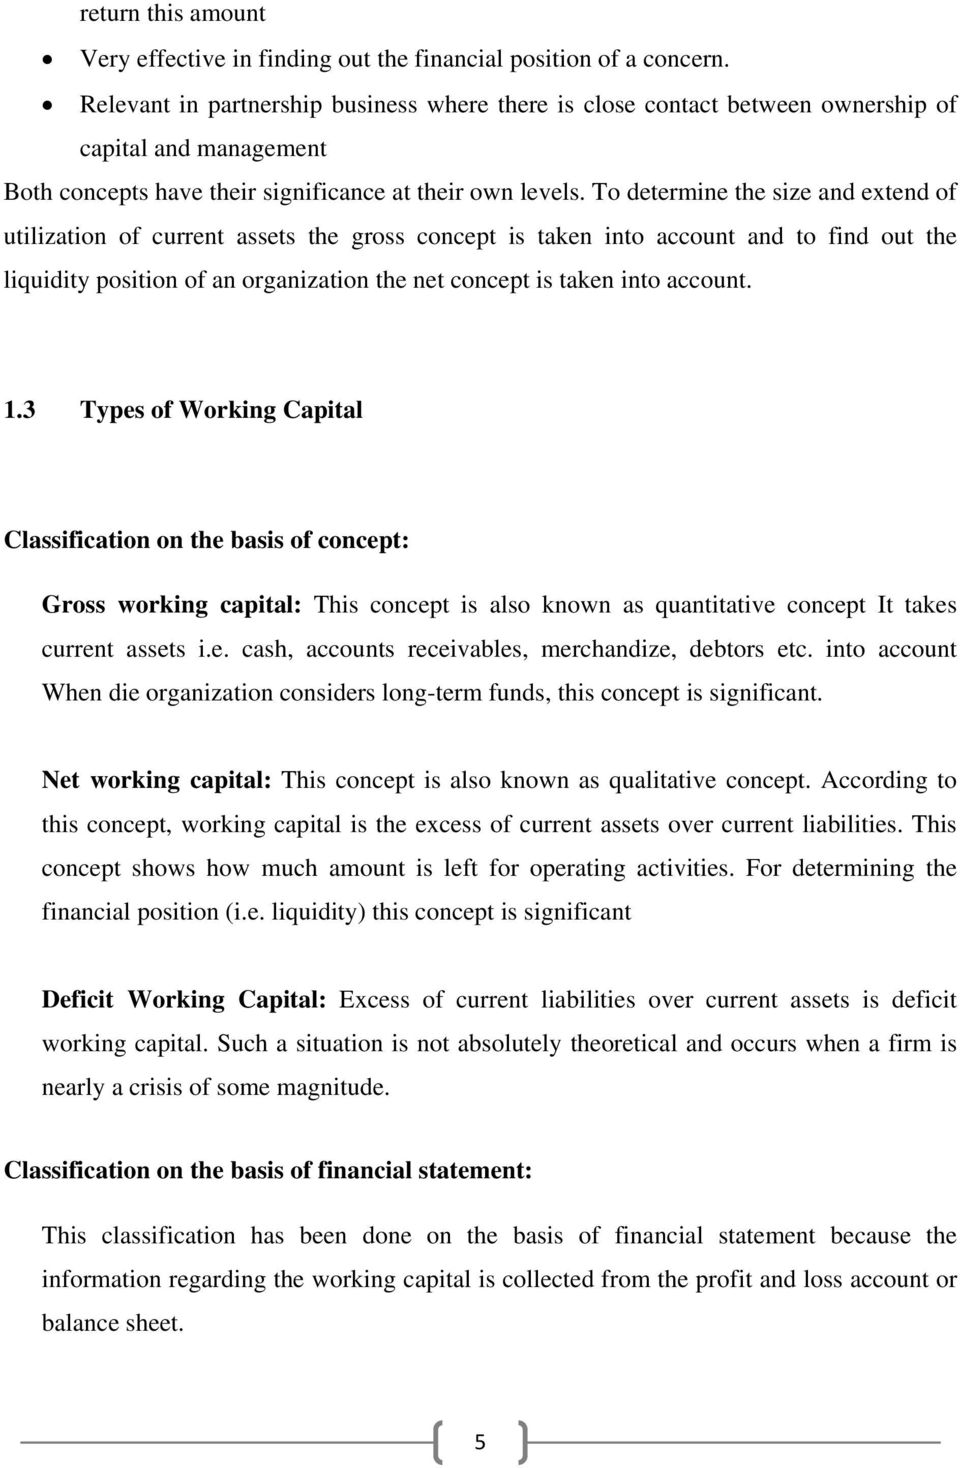 To determine the size and extend of utilization of current assets the gross concept is taken into account and to find out the liquidity position of an organization the net concept is taken into